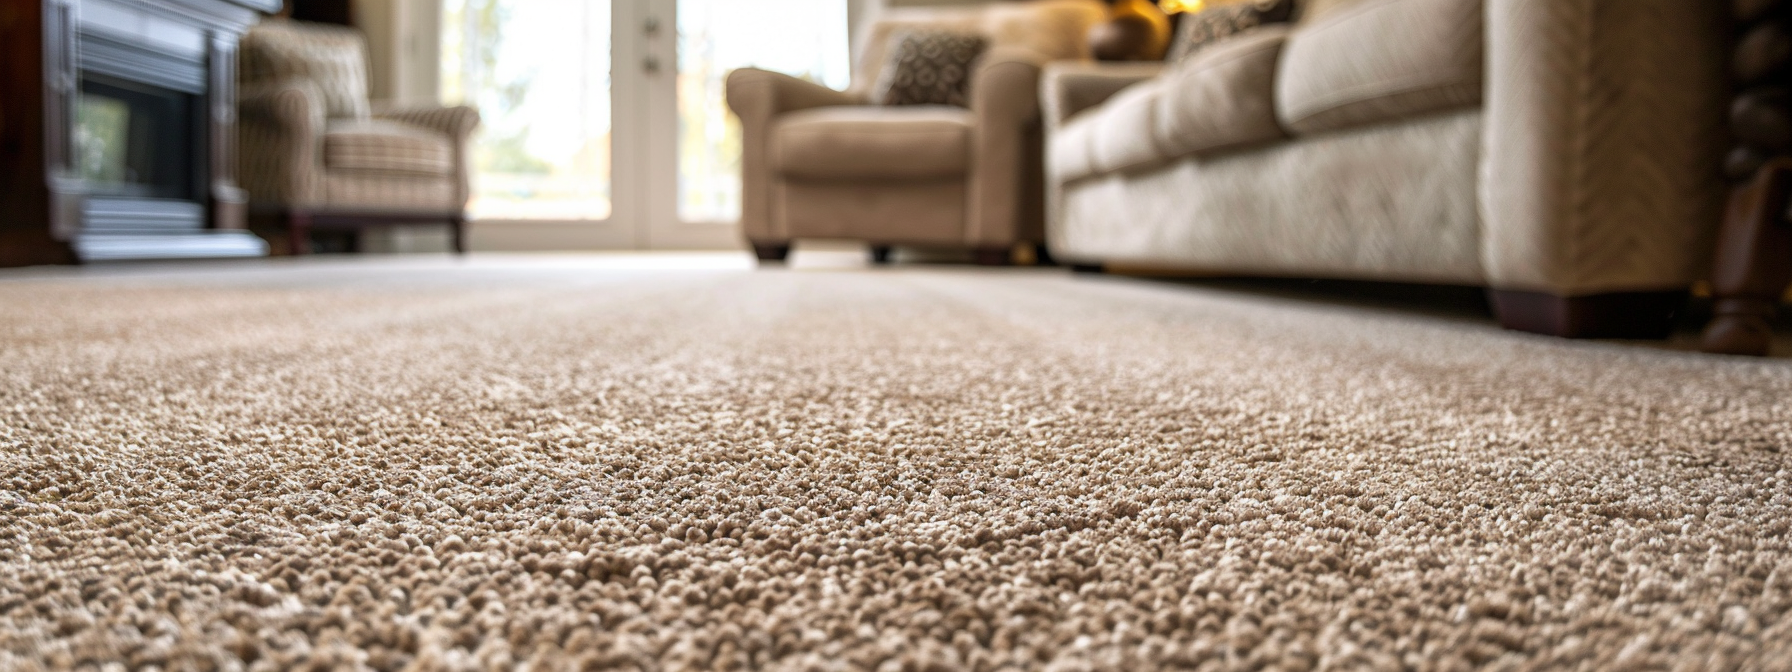 How Often Should You Have Your Carpets Professionally Cleaned?